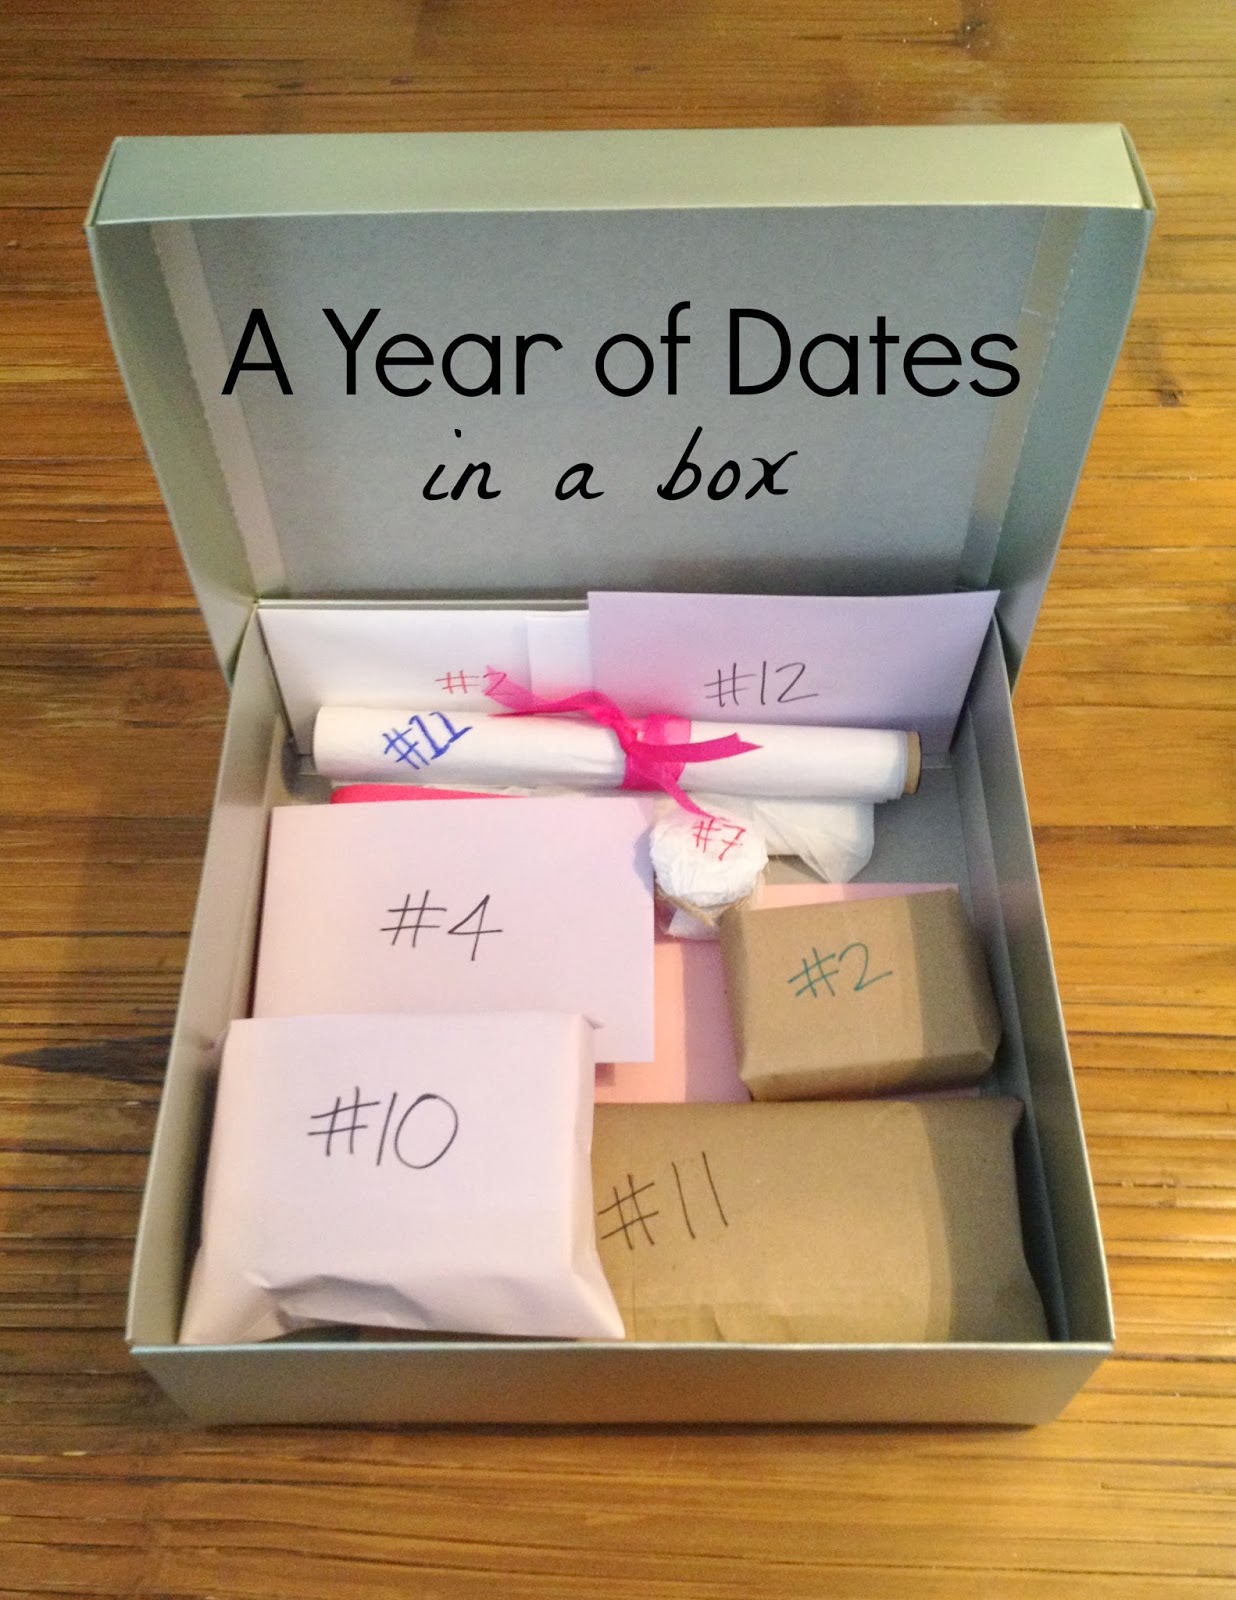 A Year of Dates in a box